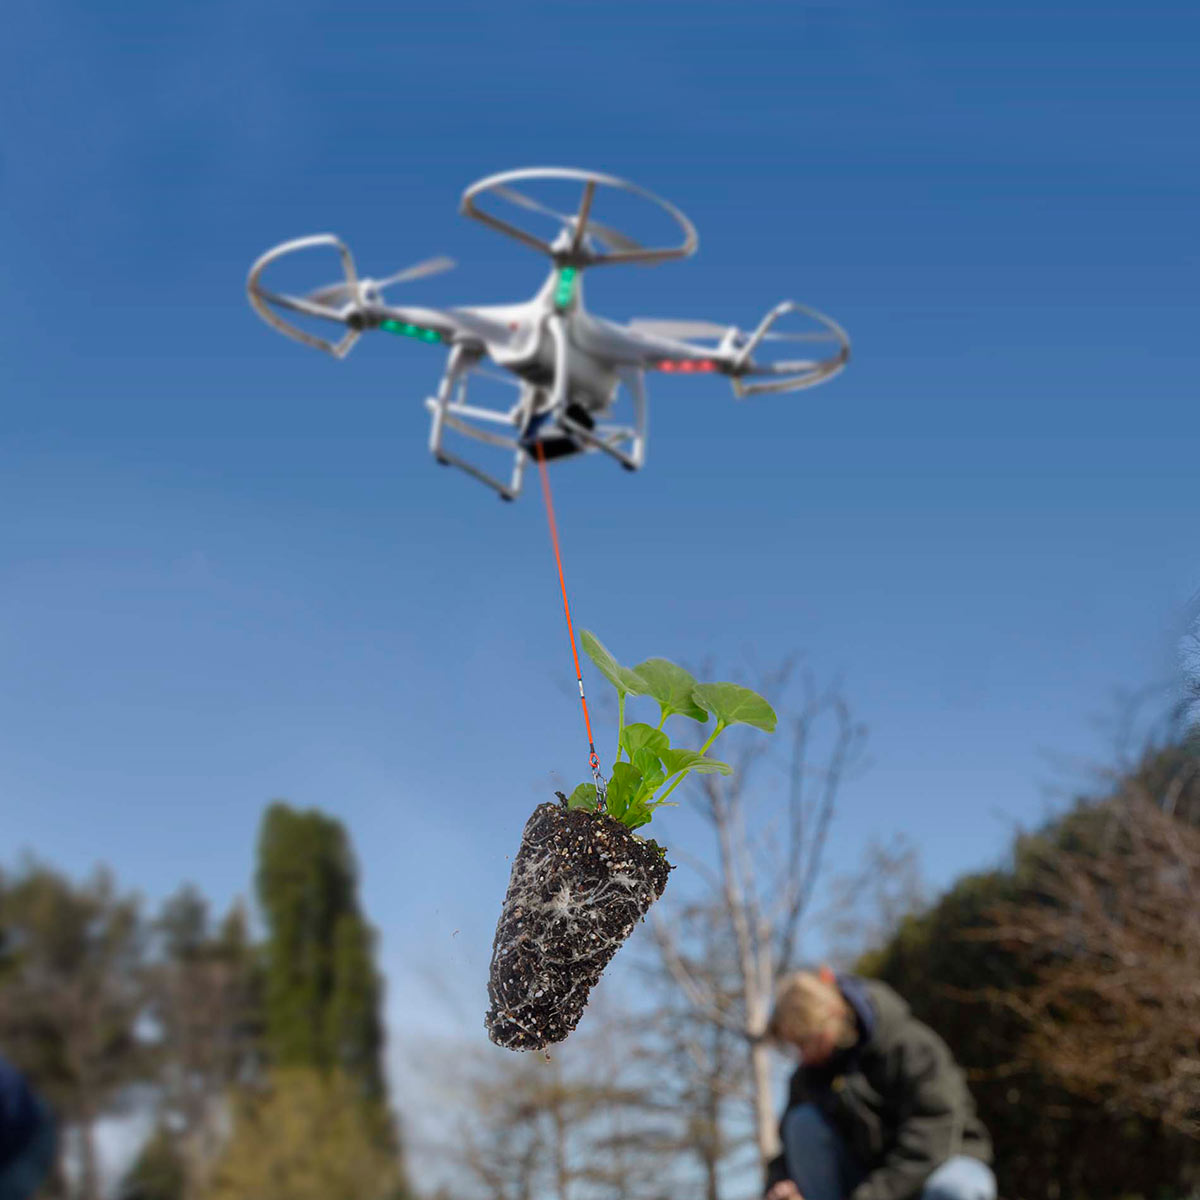 Drone quadcopter delivers a small seedling plant to a gardener.